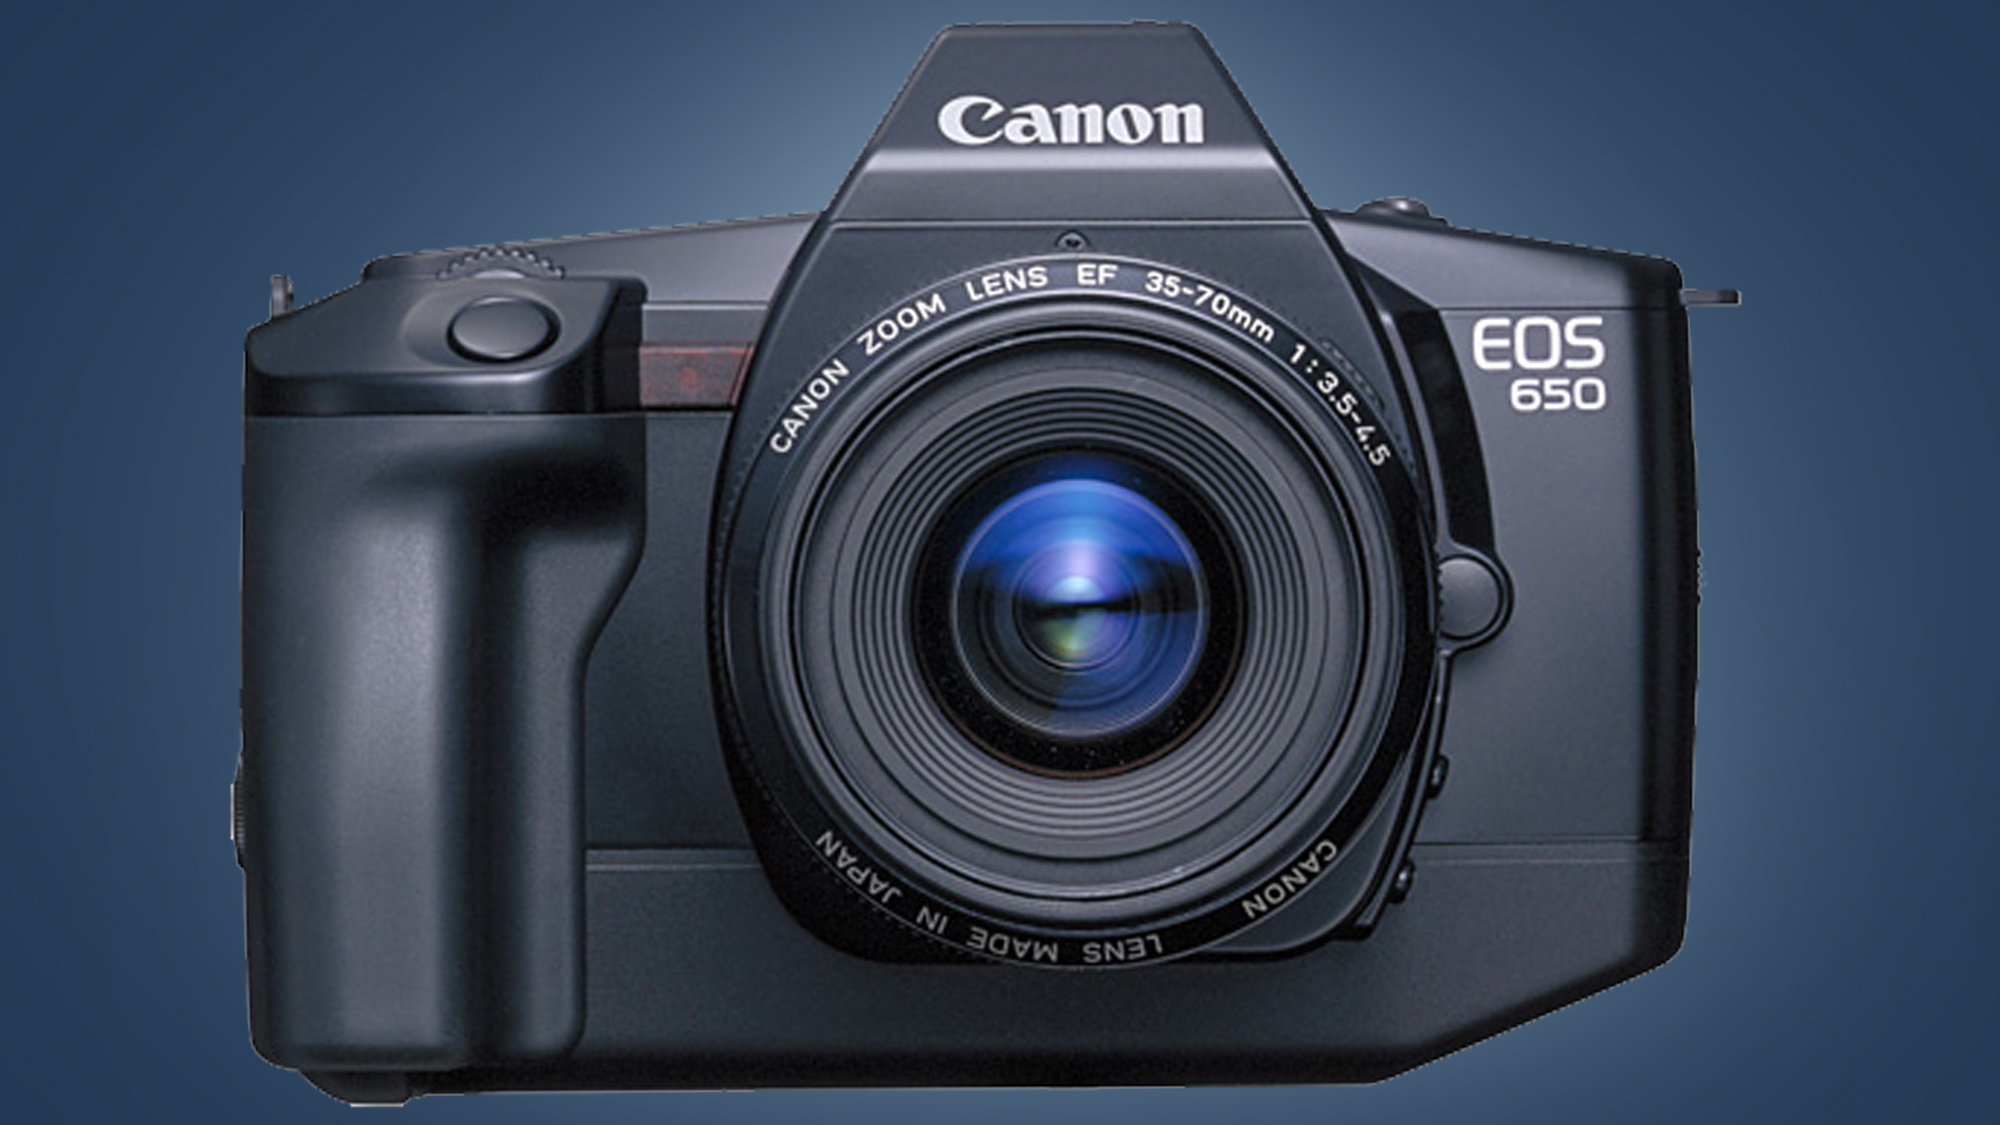 Why The Canon Eos 650 Was The Iphone Moment For Cameras Techradar